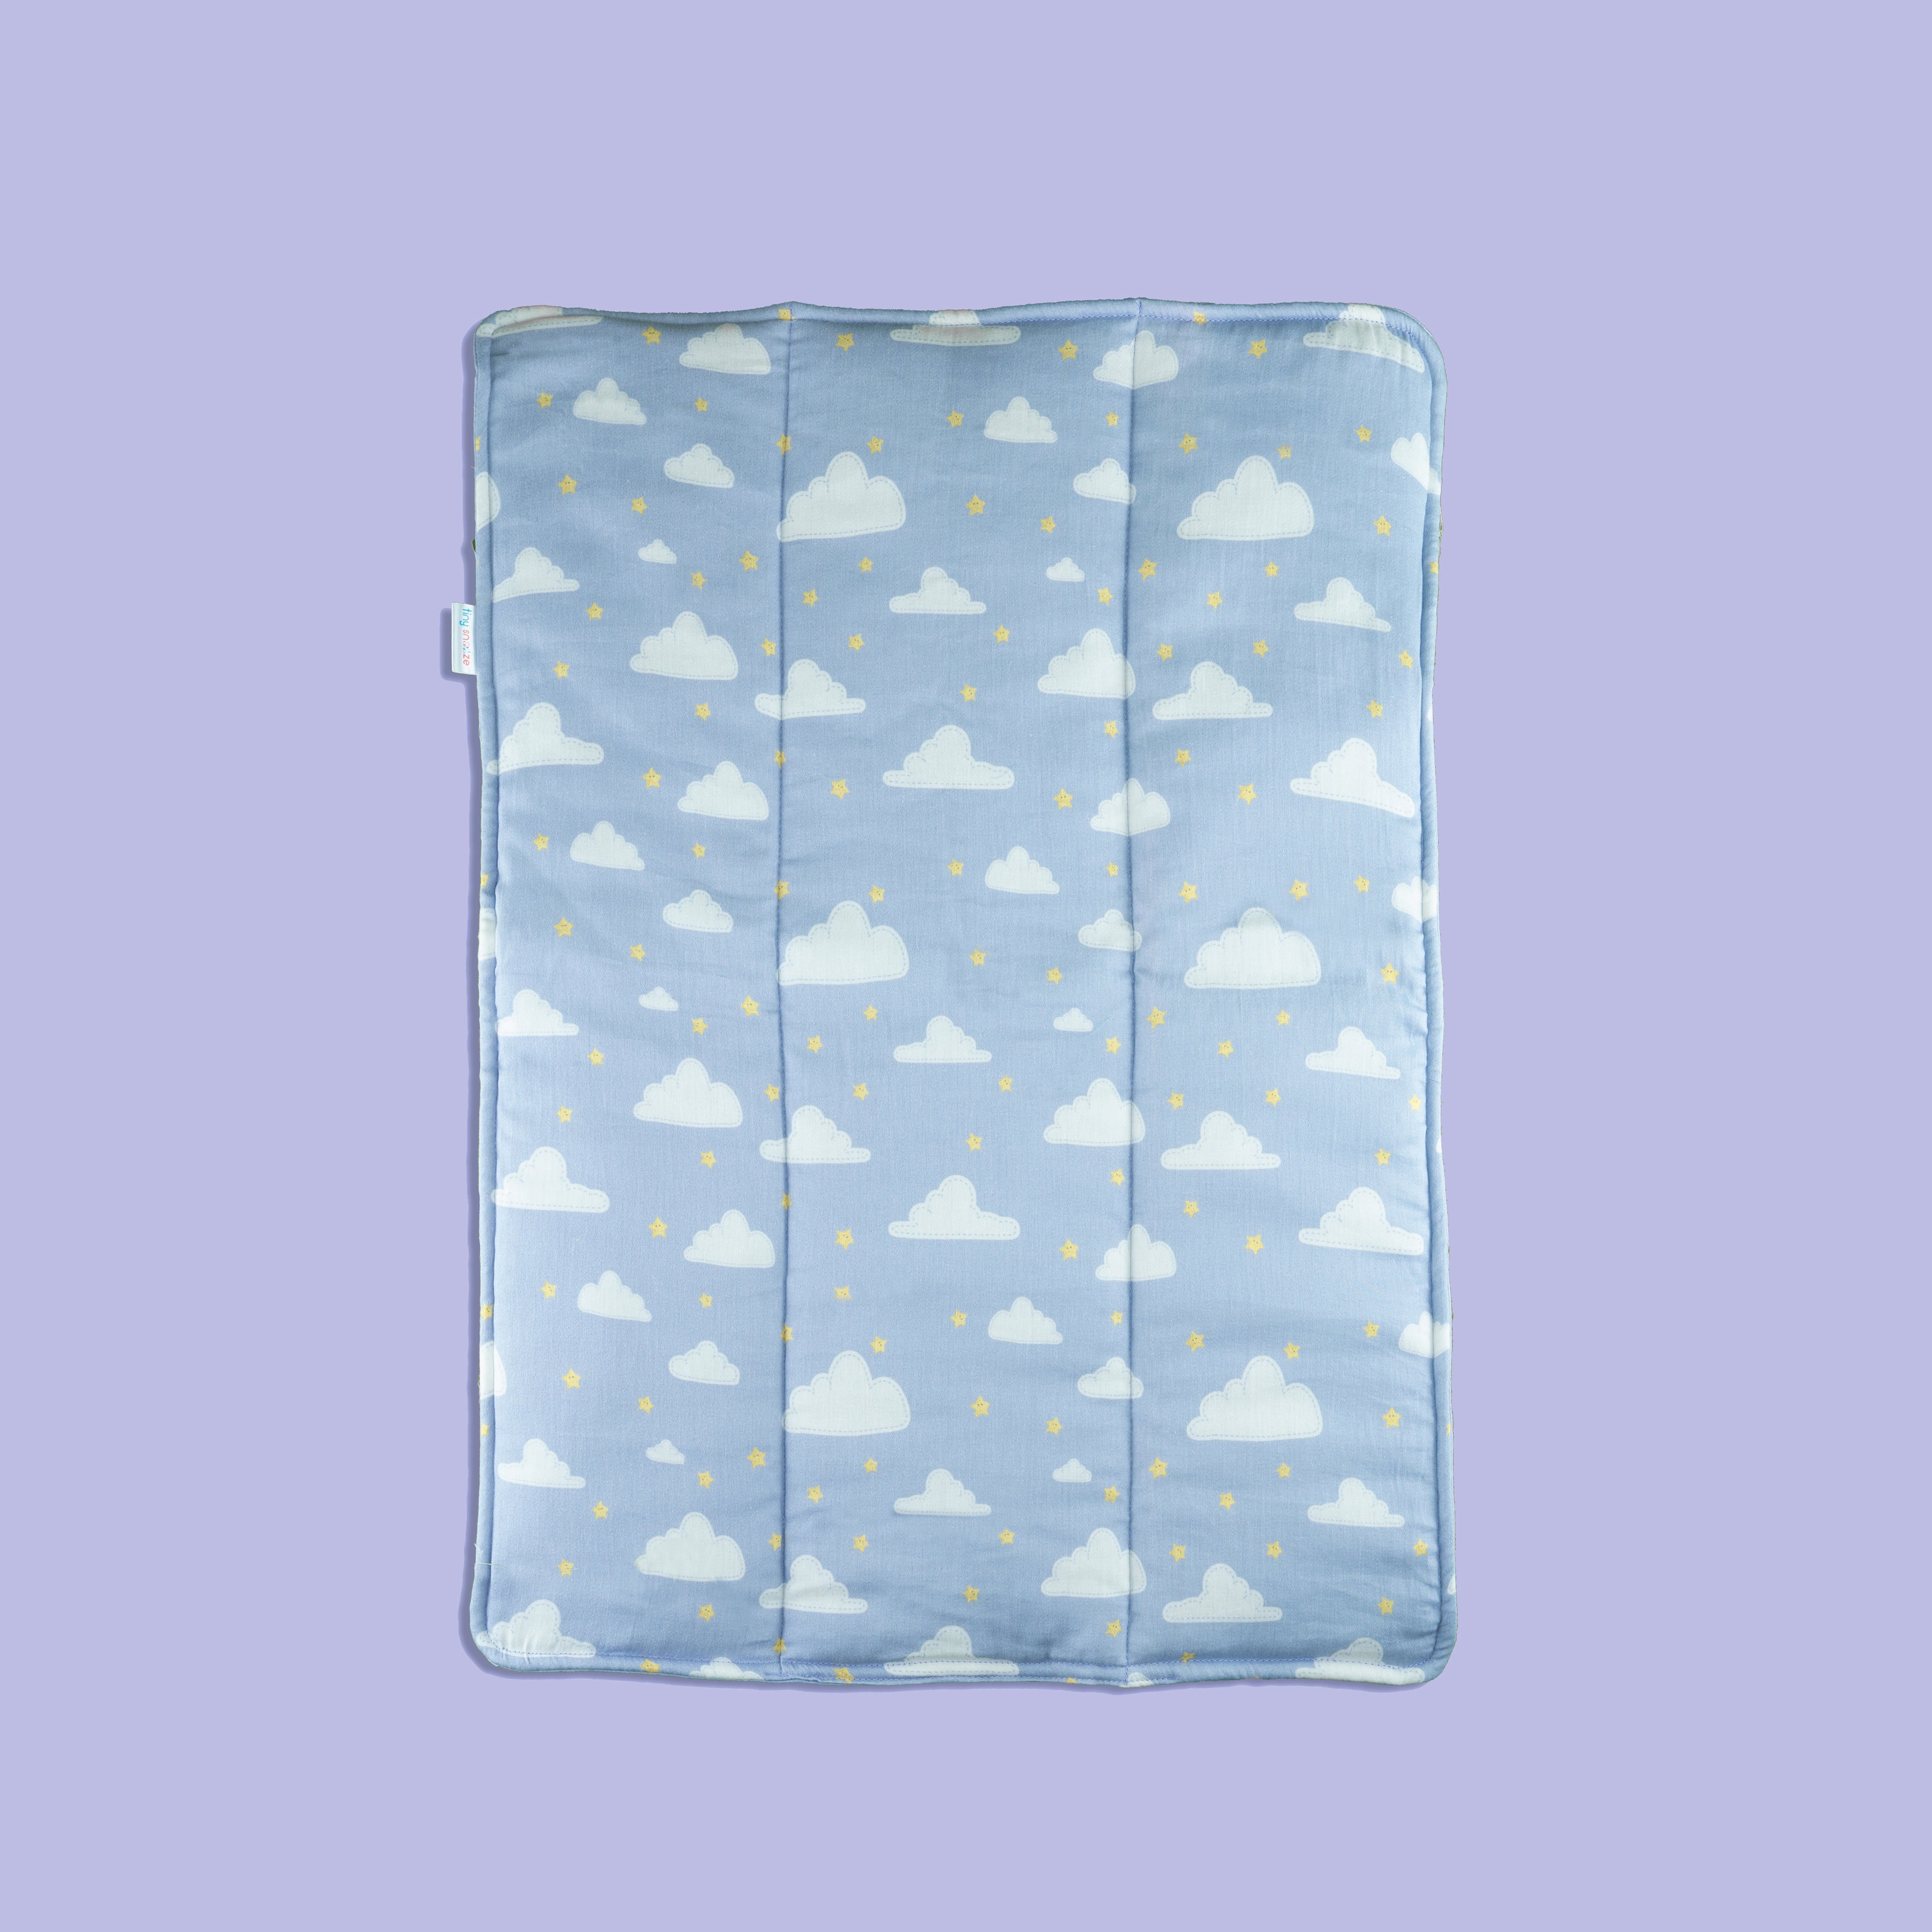 Tiny Snooze Organic Bed Protector- Clouds